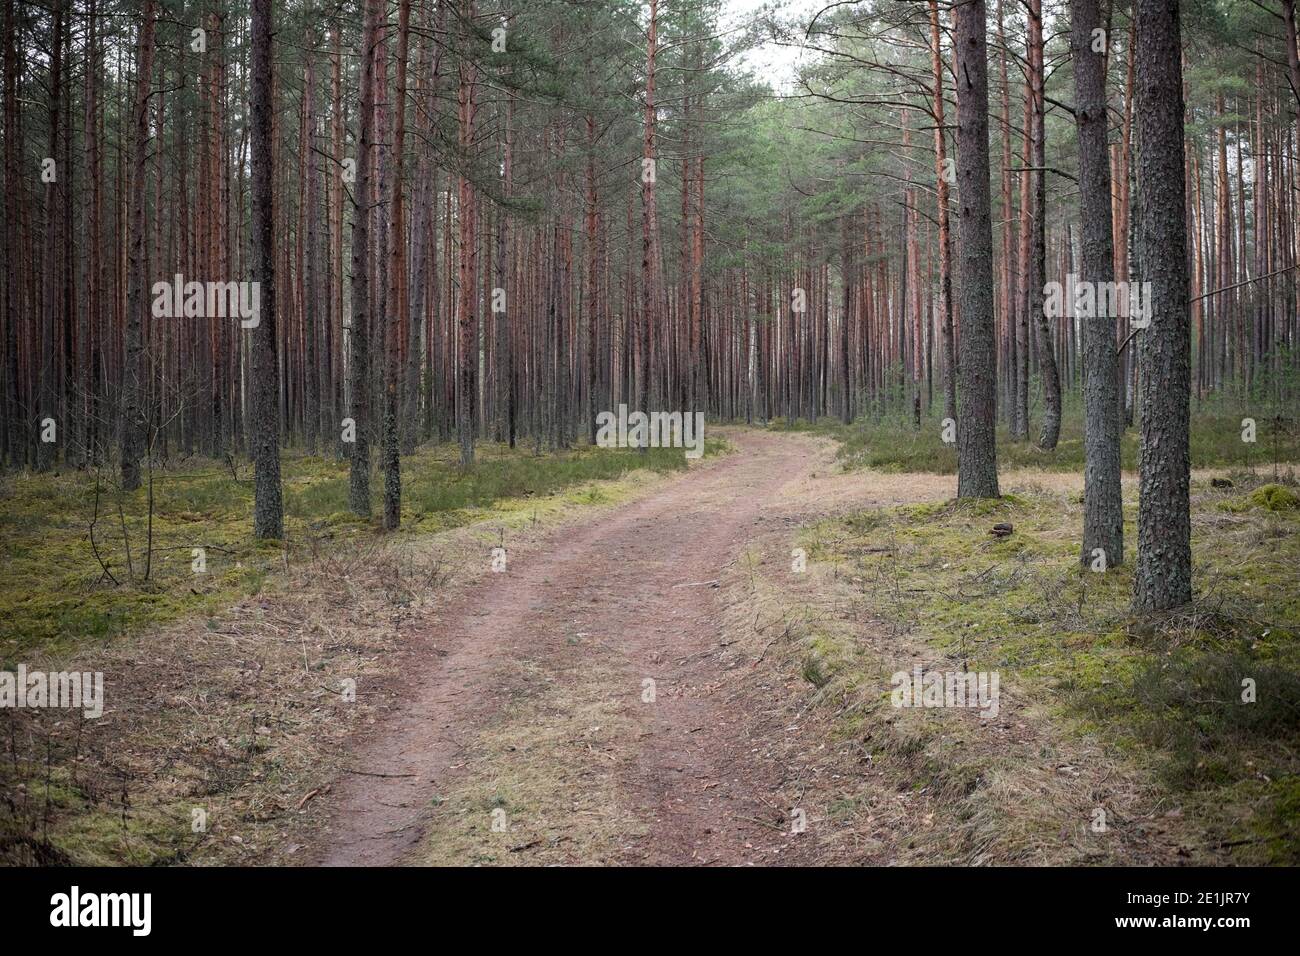 A curved path through thick pine forest Stock Photo